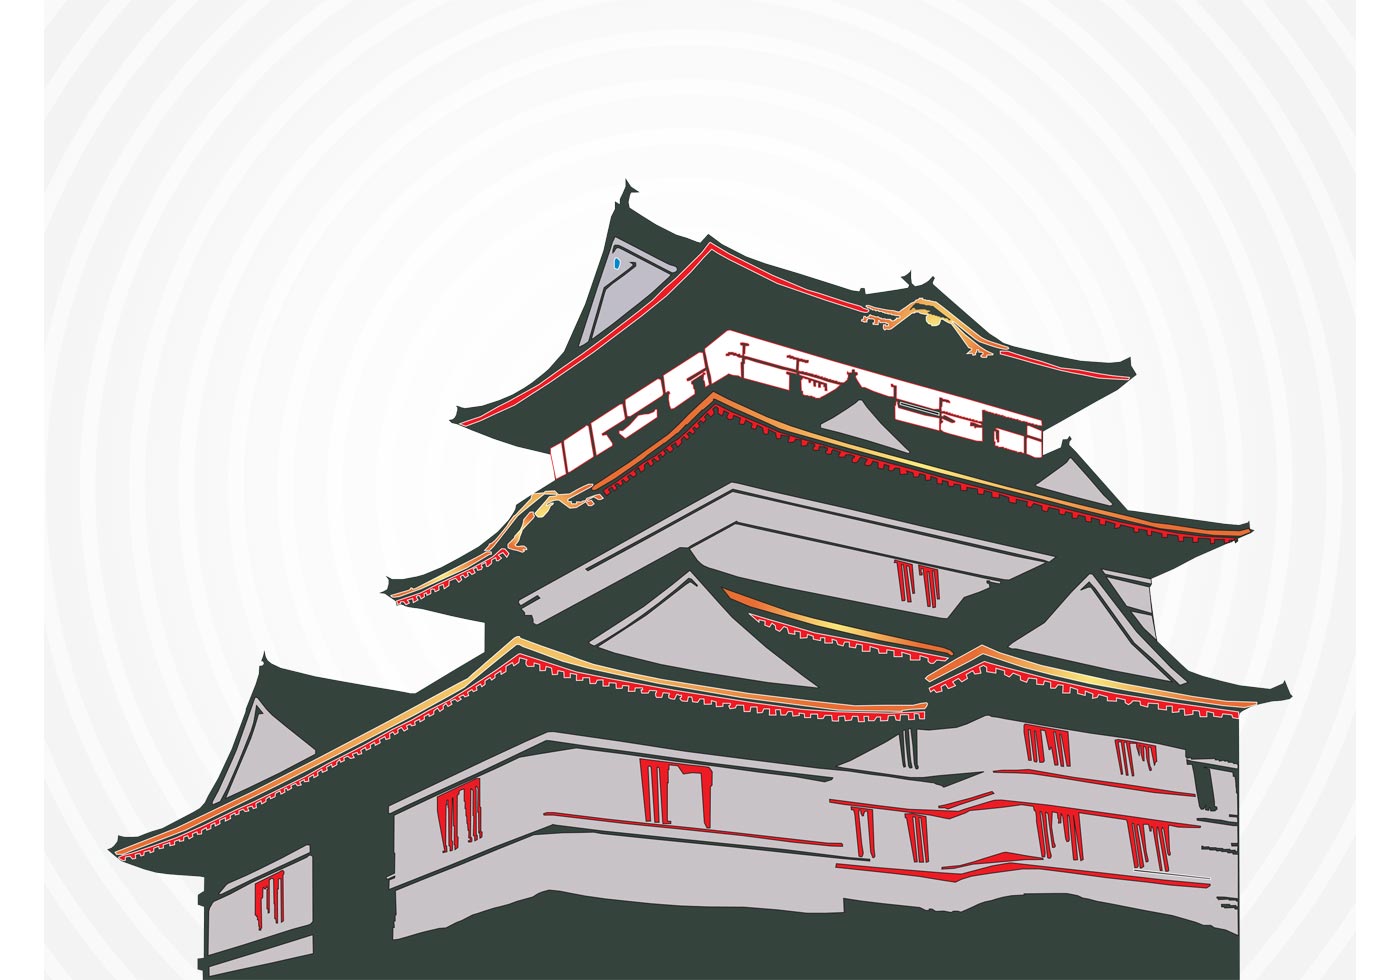  Japanese  House  Download Free Vector Art  Stock Graphics Images